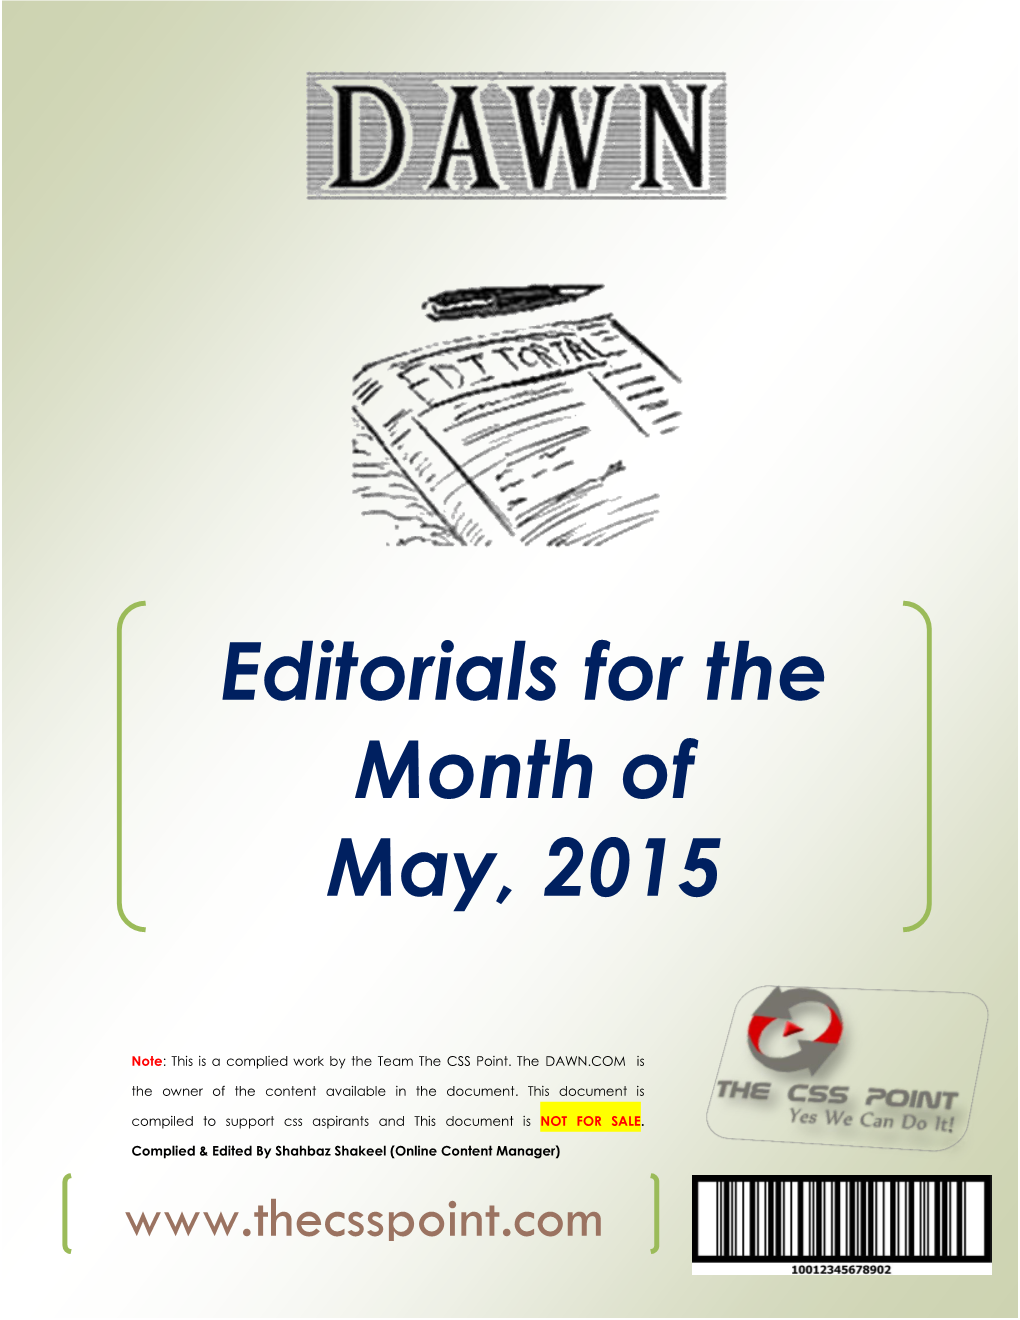 Editorials for the Month of May, 2015